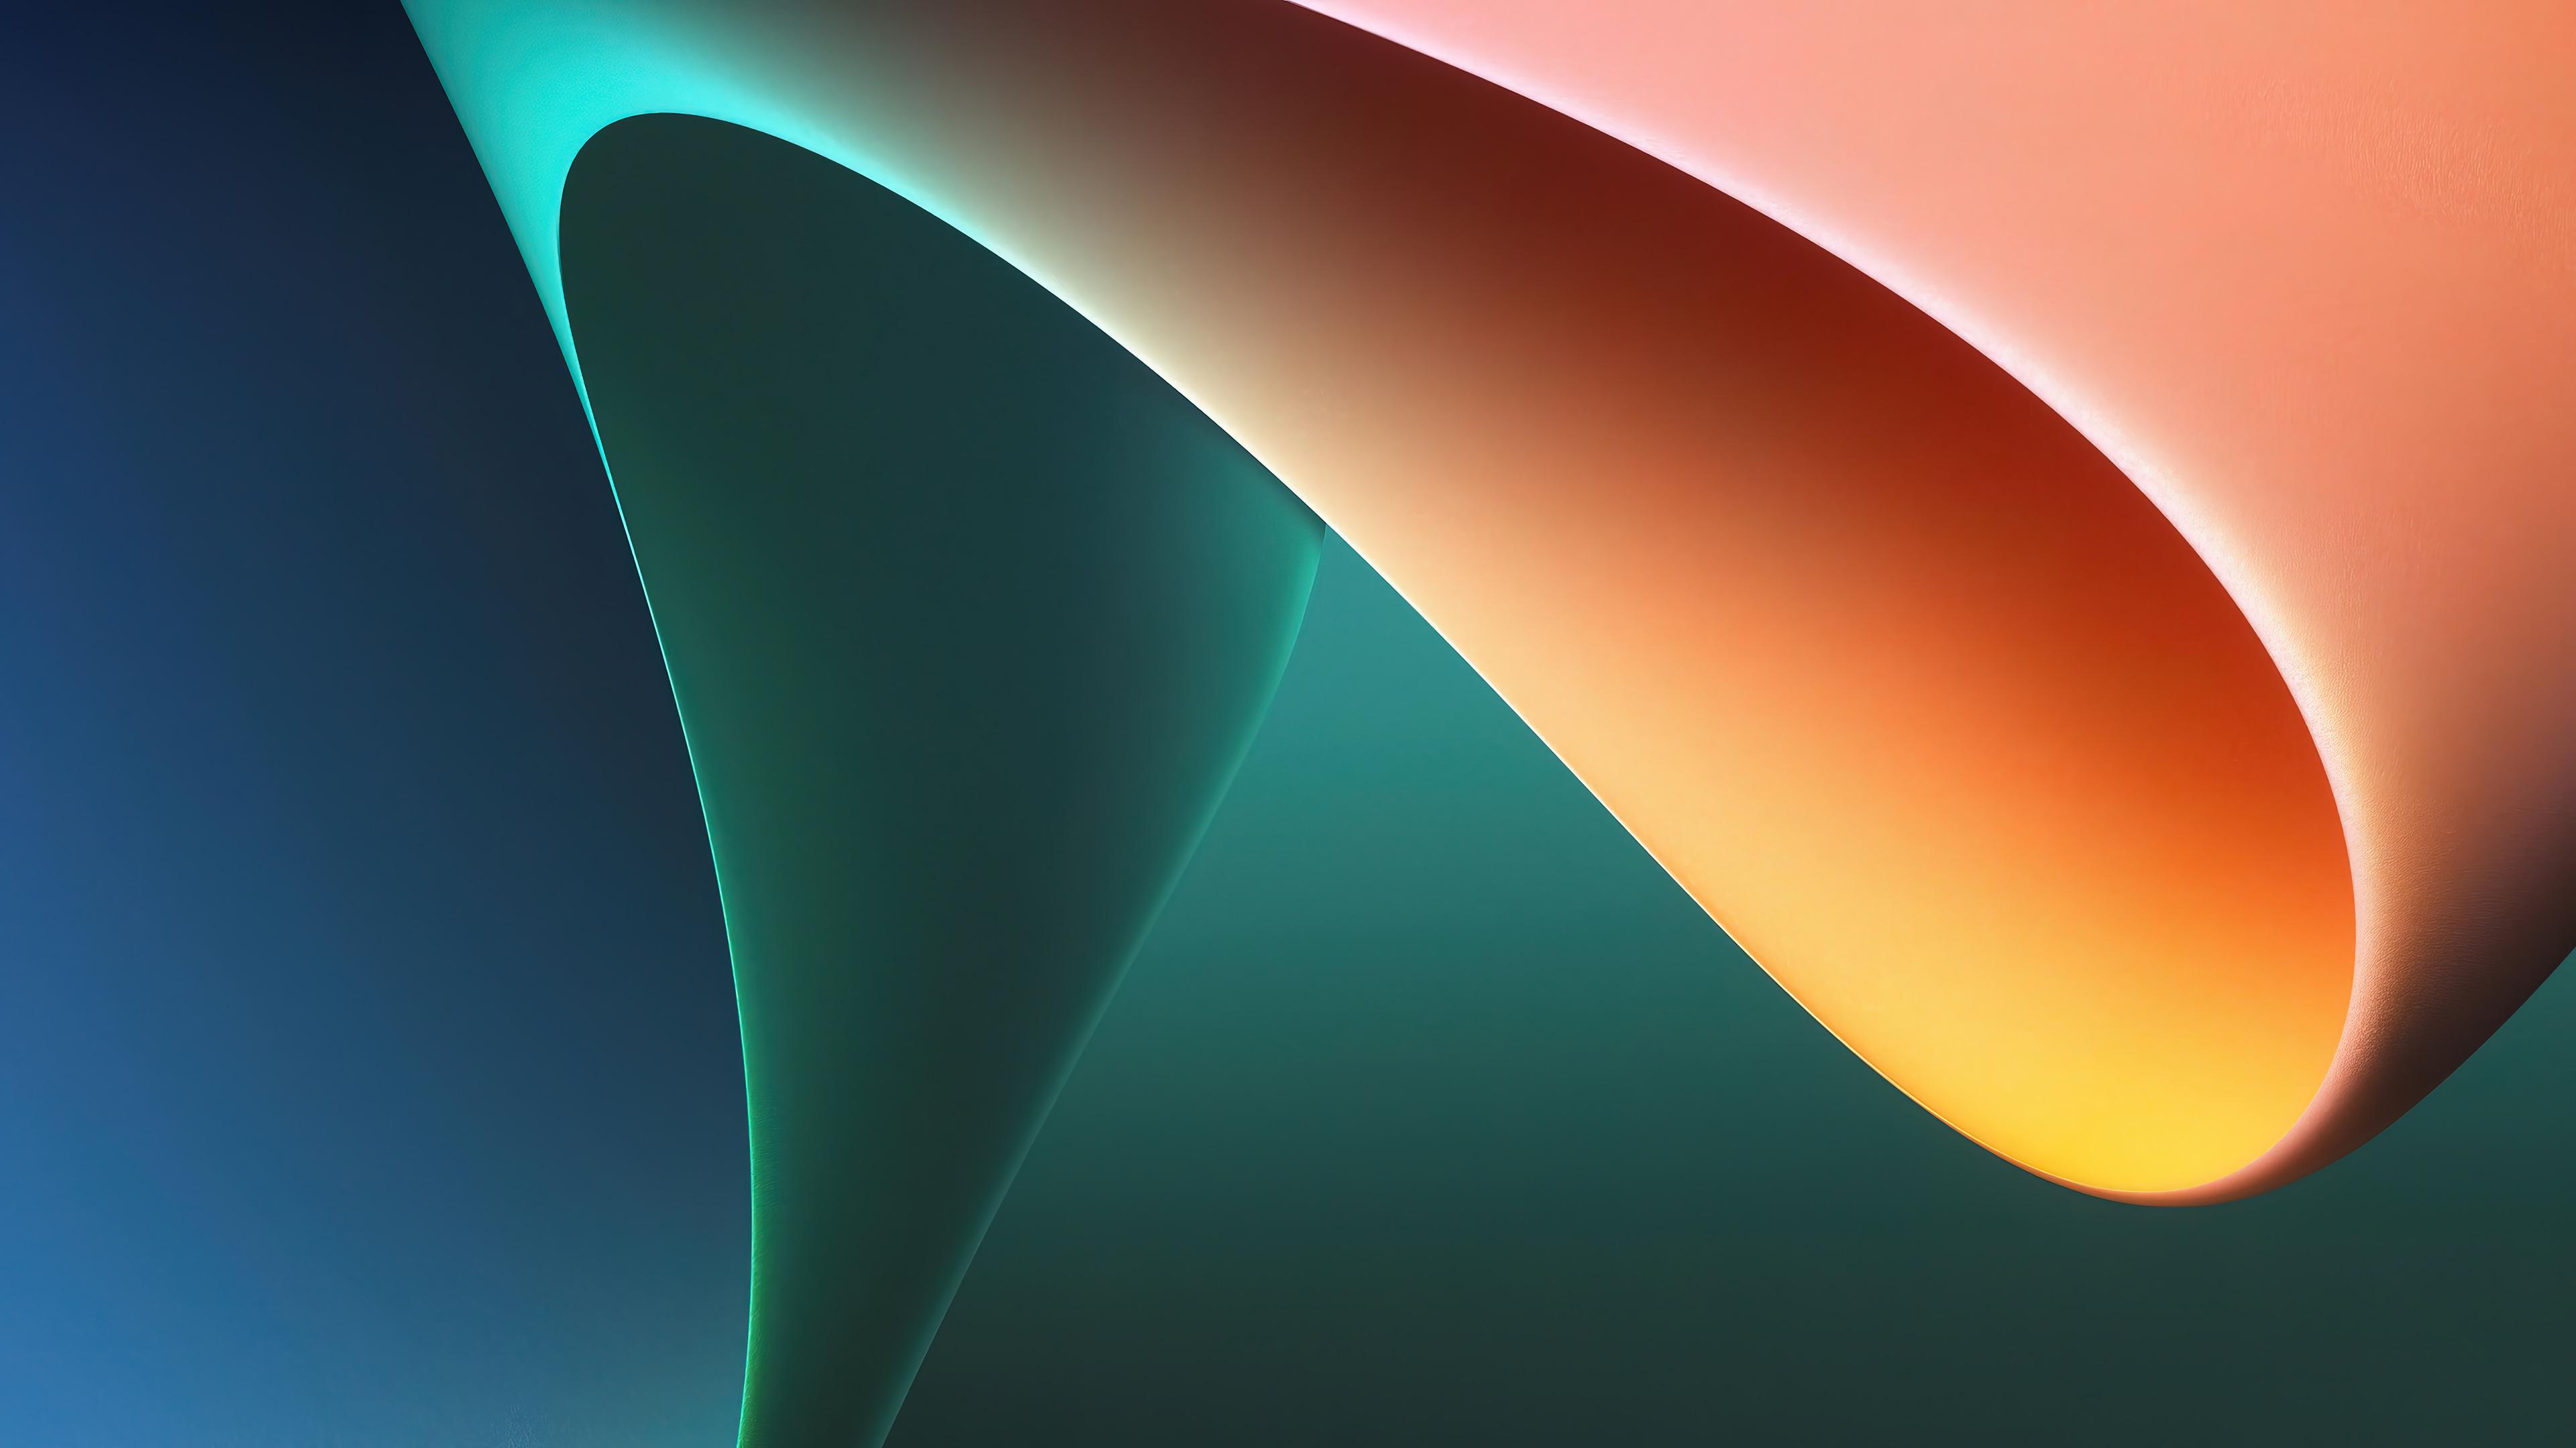 Abstract Colorful Background Wallpaper iPhone Phone 4k 4240e